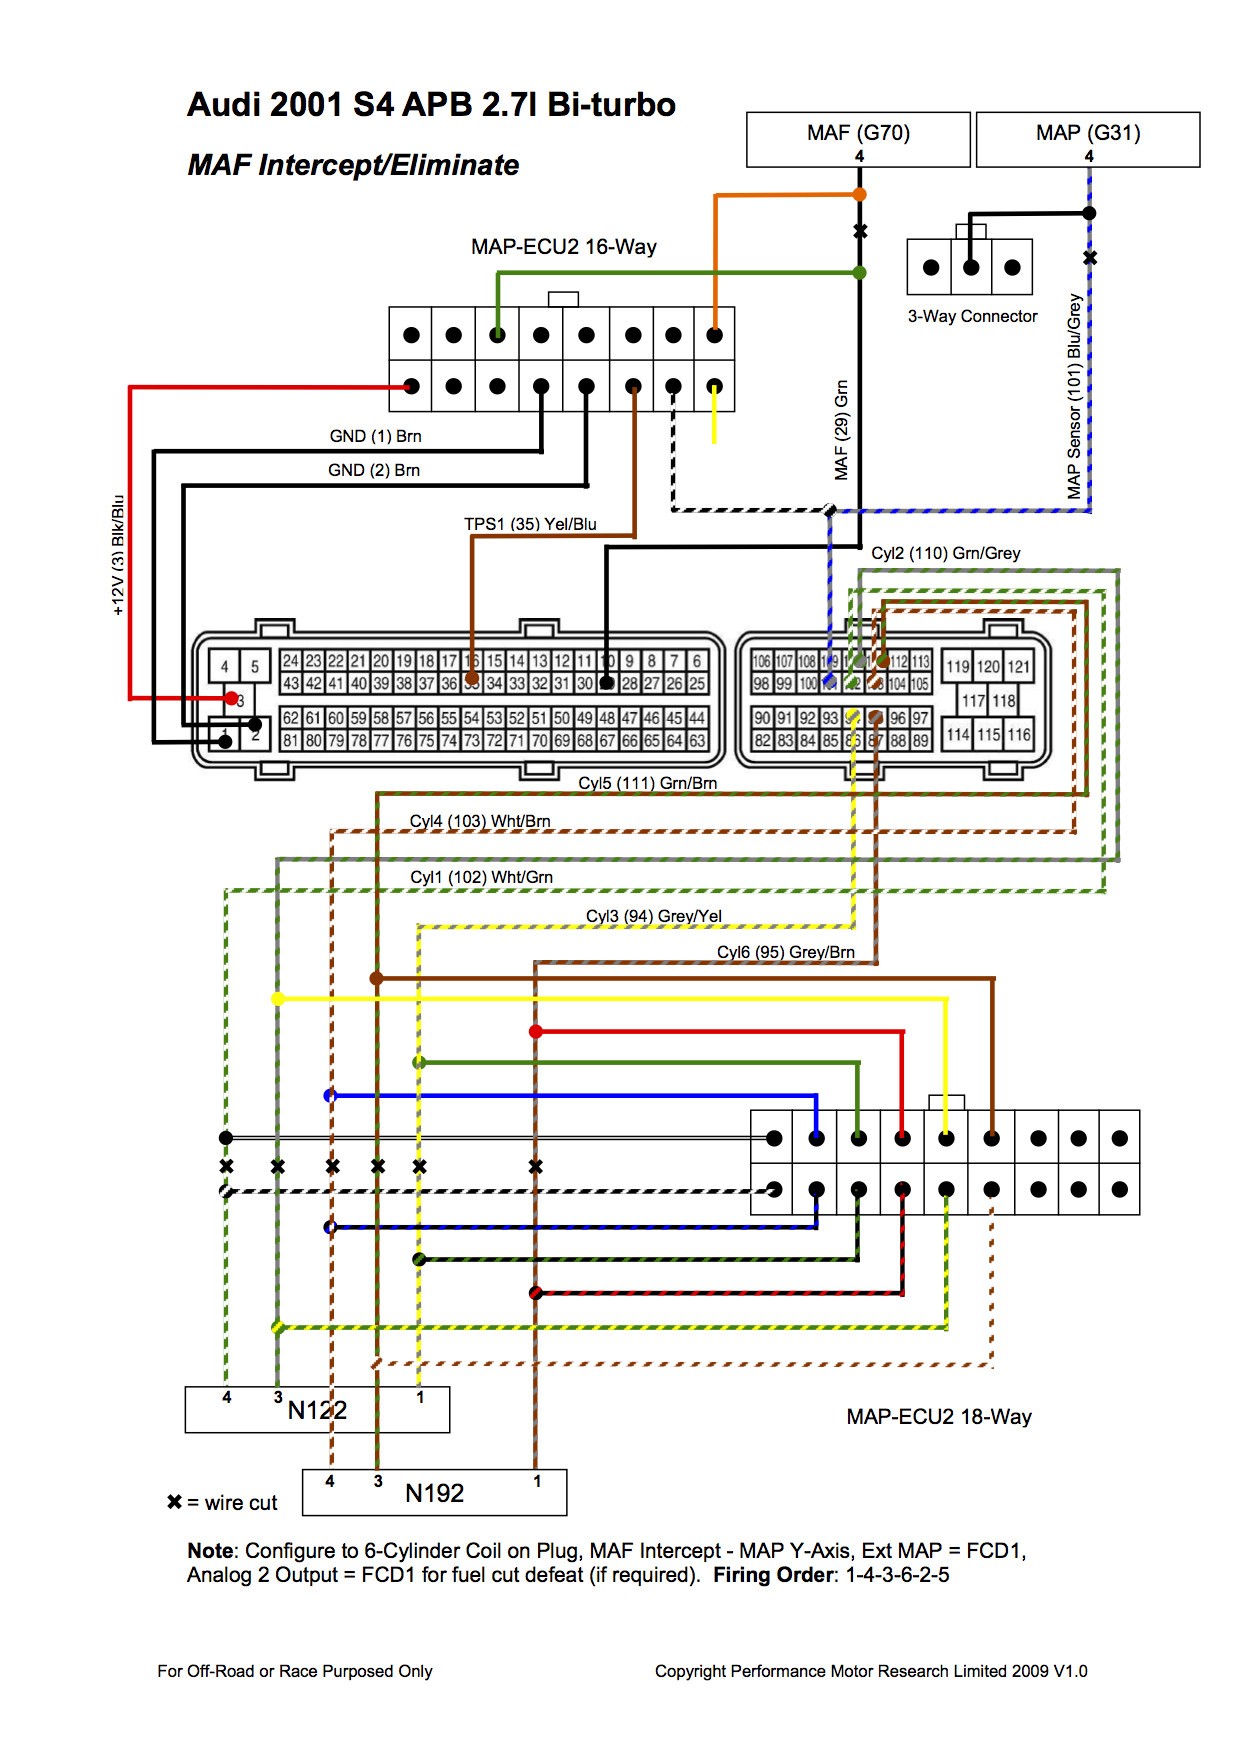 1989 Toyota Pickup Stereo Wiring Diagram from mainetreasurechest.com